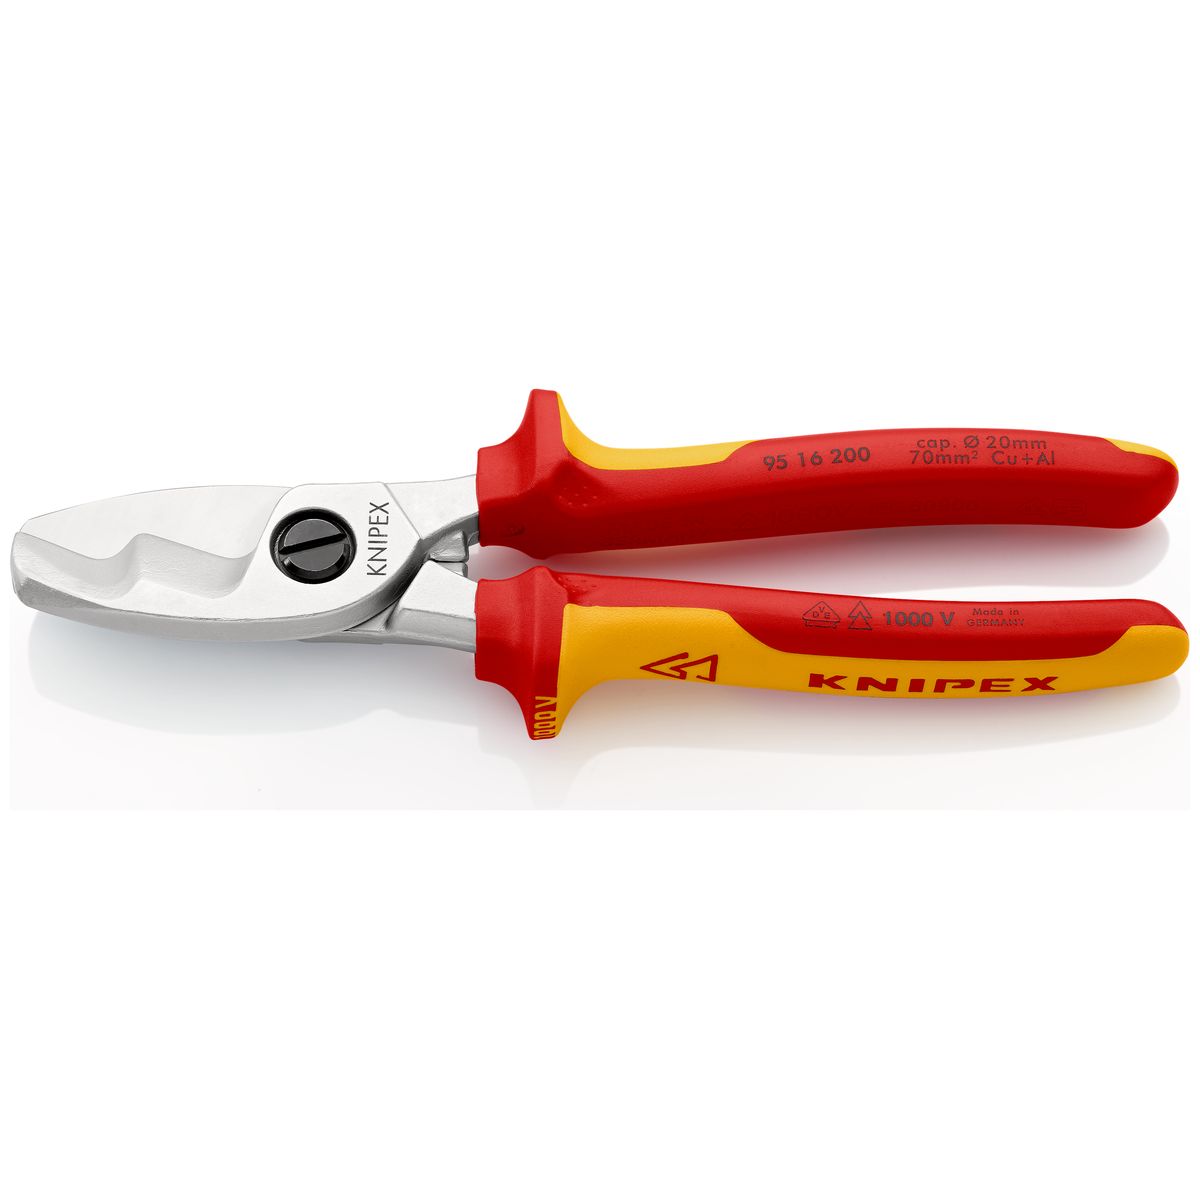 CABLE SHEARS 9516 200mm Knipex